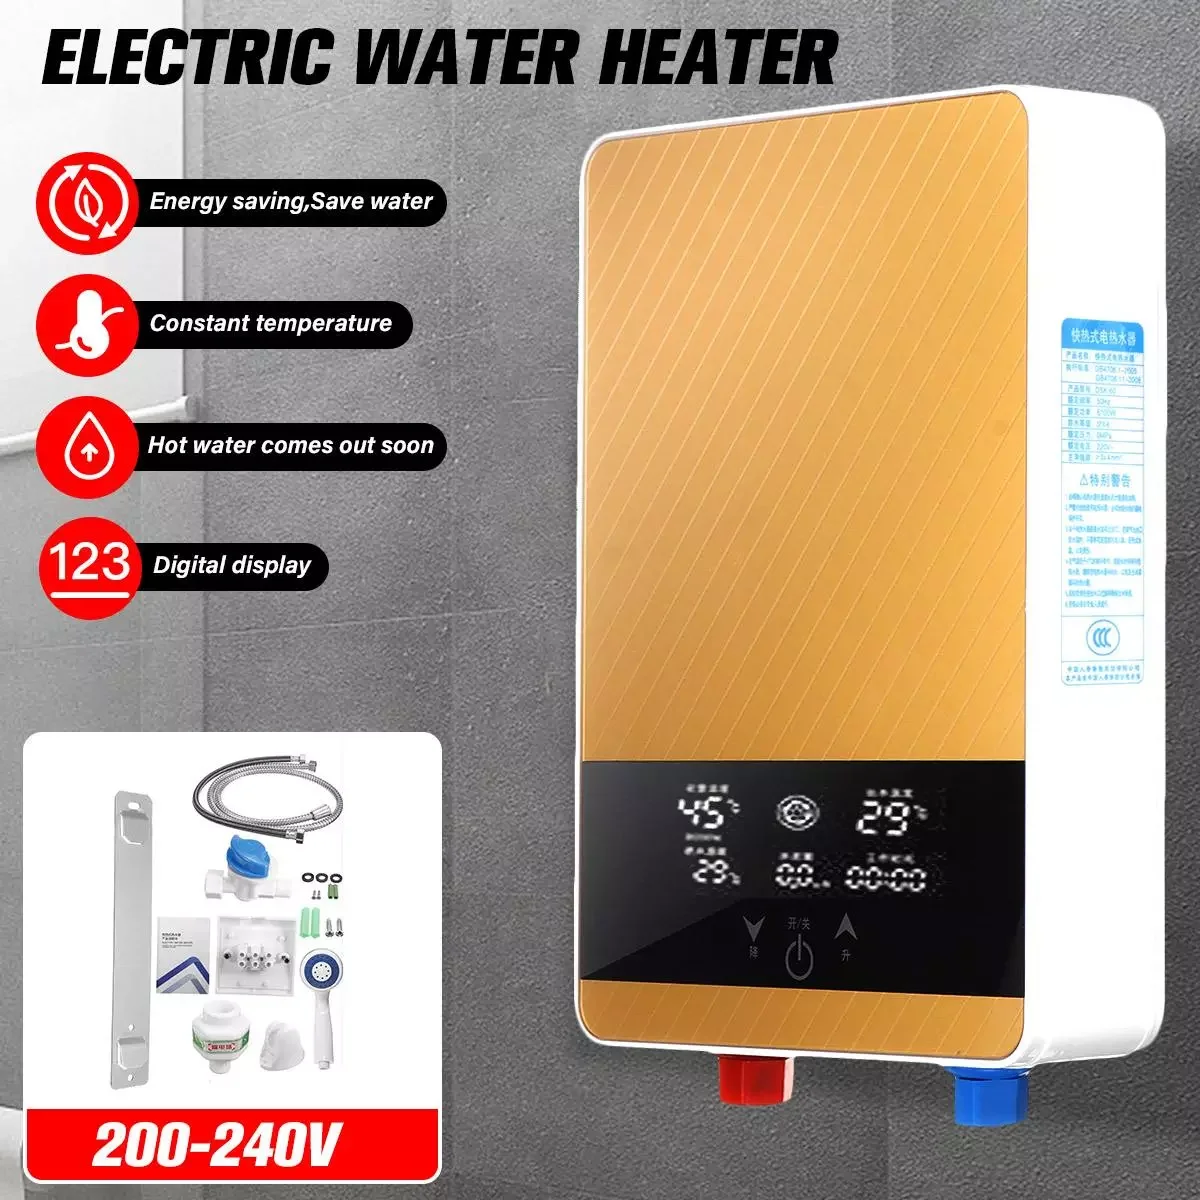 

NEW 110V-220V 6000W Instant Electric Water Heater Home Intelligent Constant Temperature Fast Heating Small Shower Bath Machine